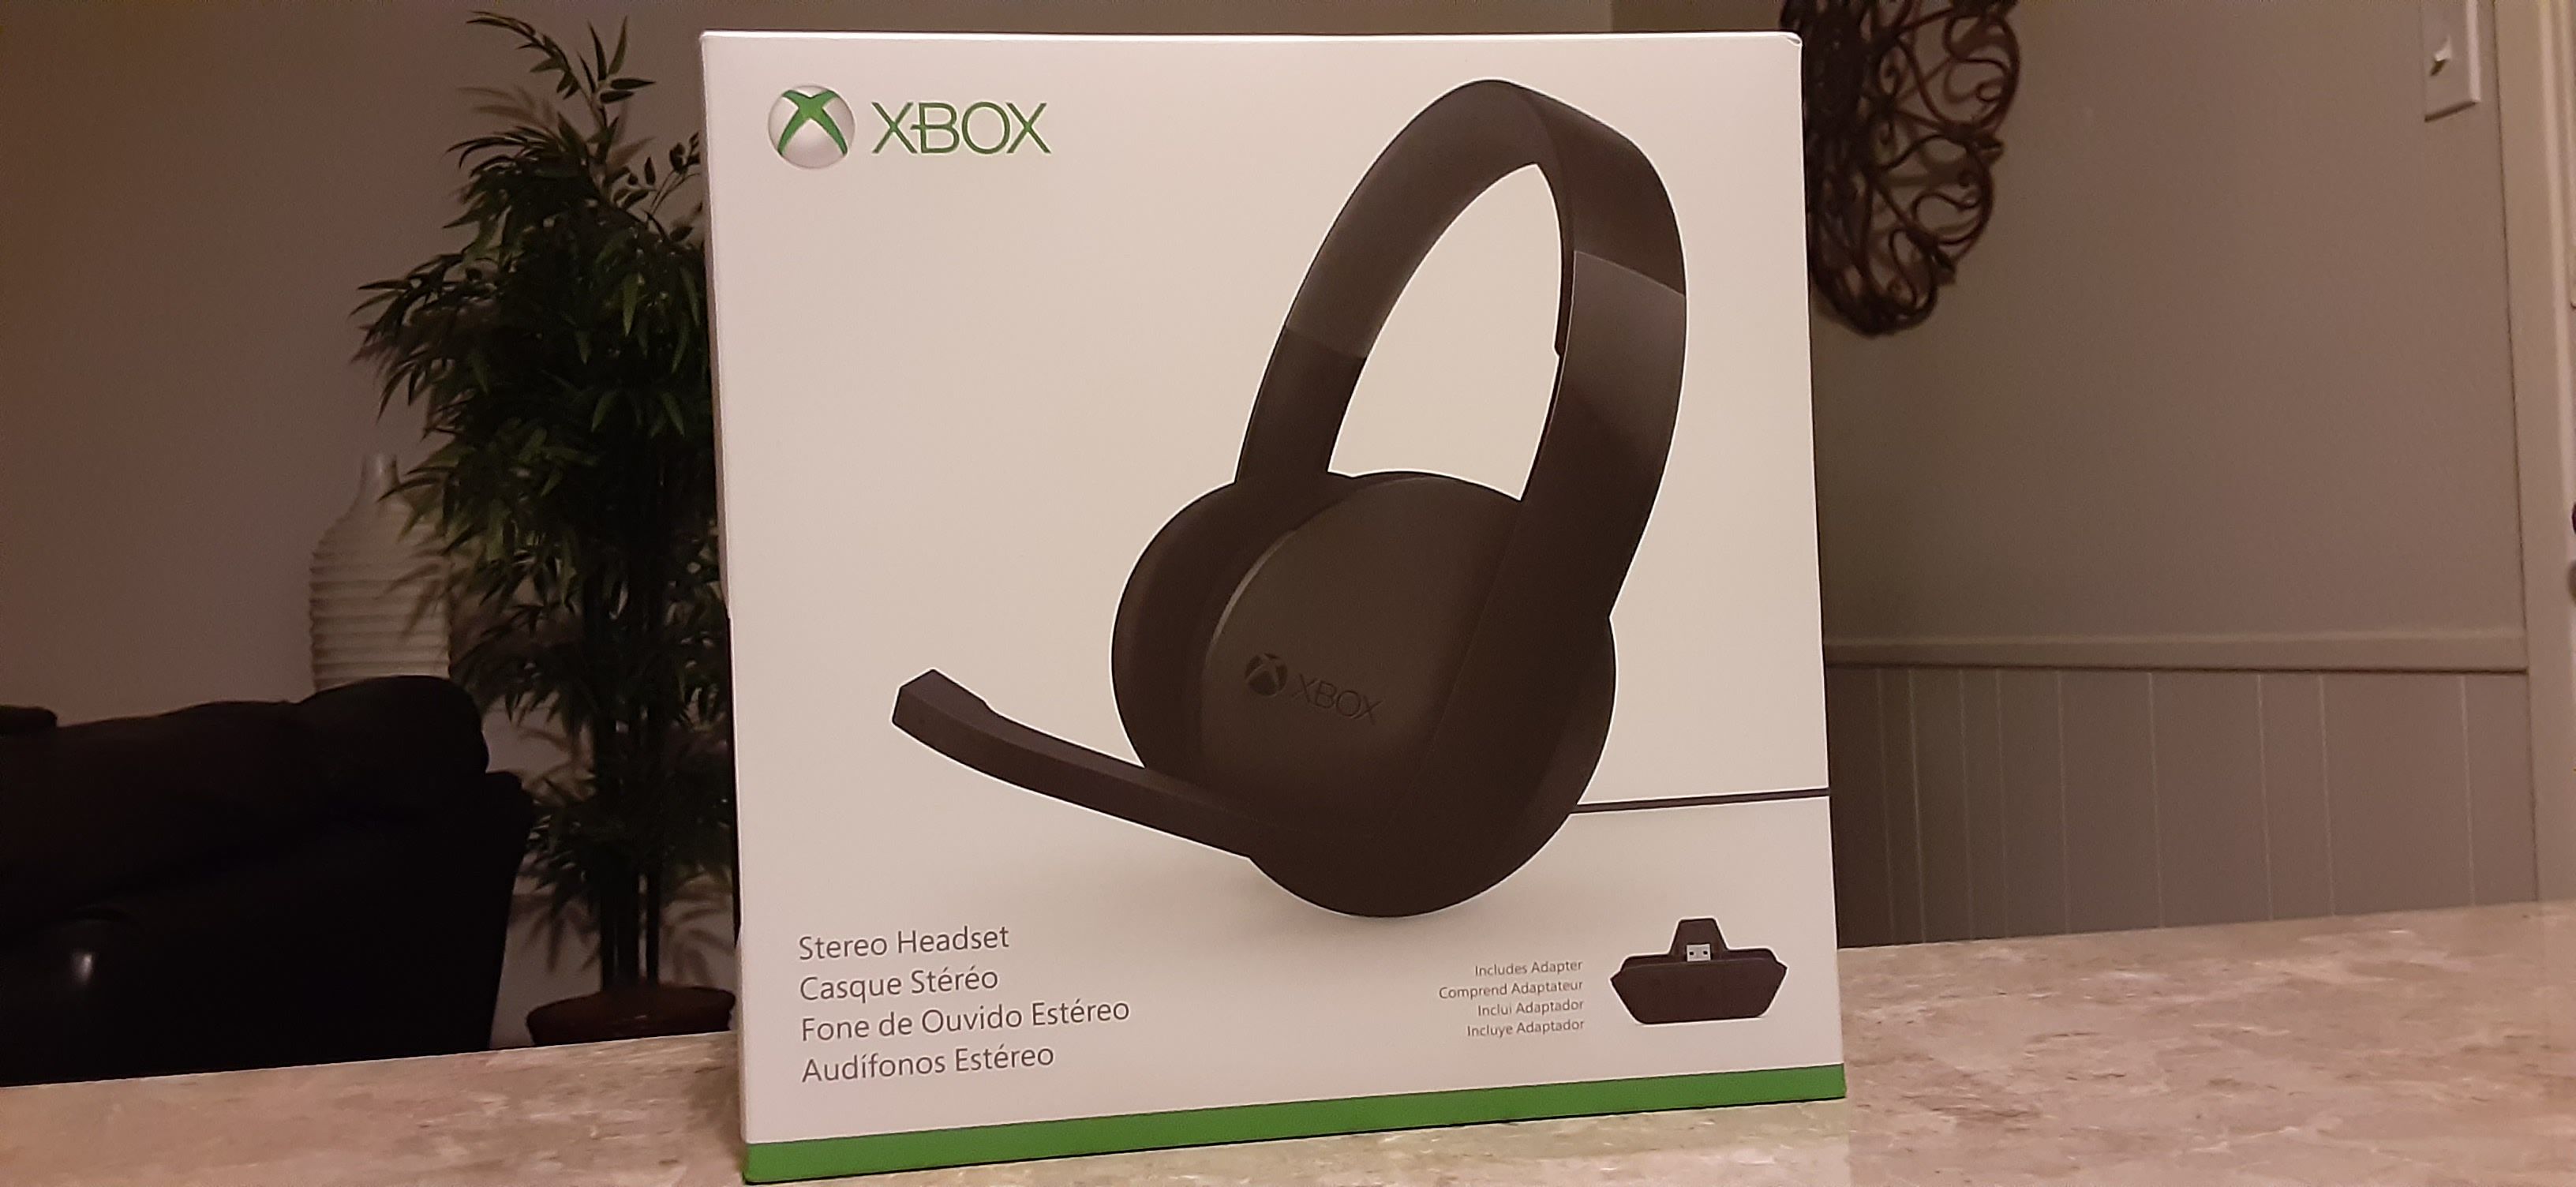 *NEW IN BOX* XBOX HEADSET WITH BOOM MIC FOR XBOX SERIES X/S